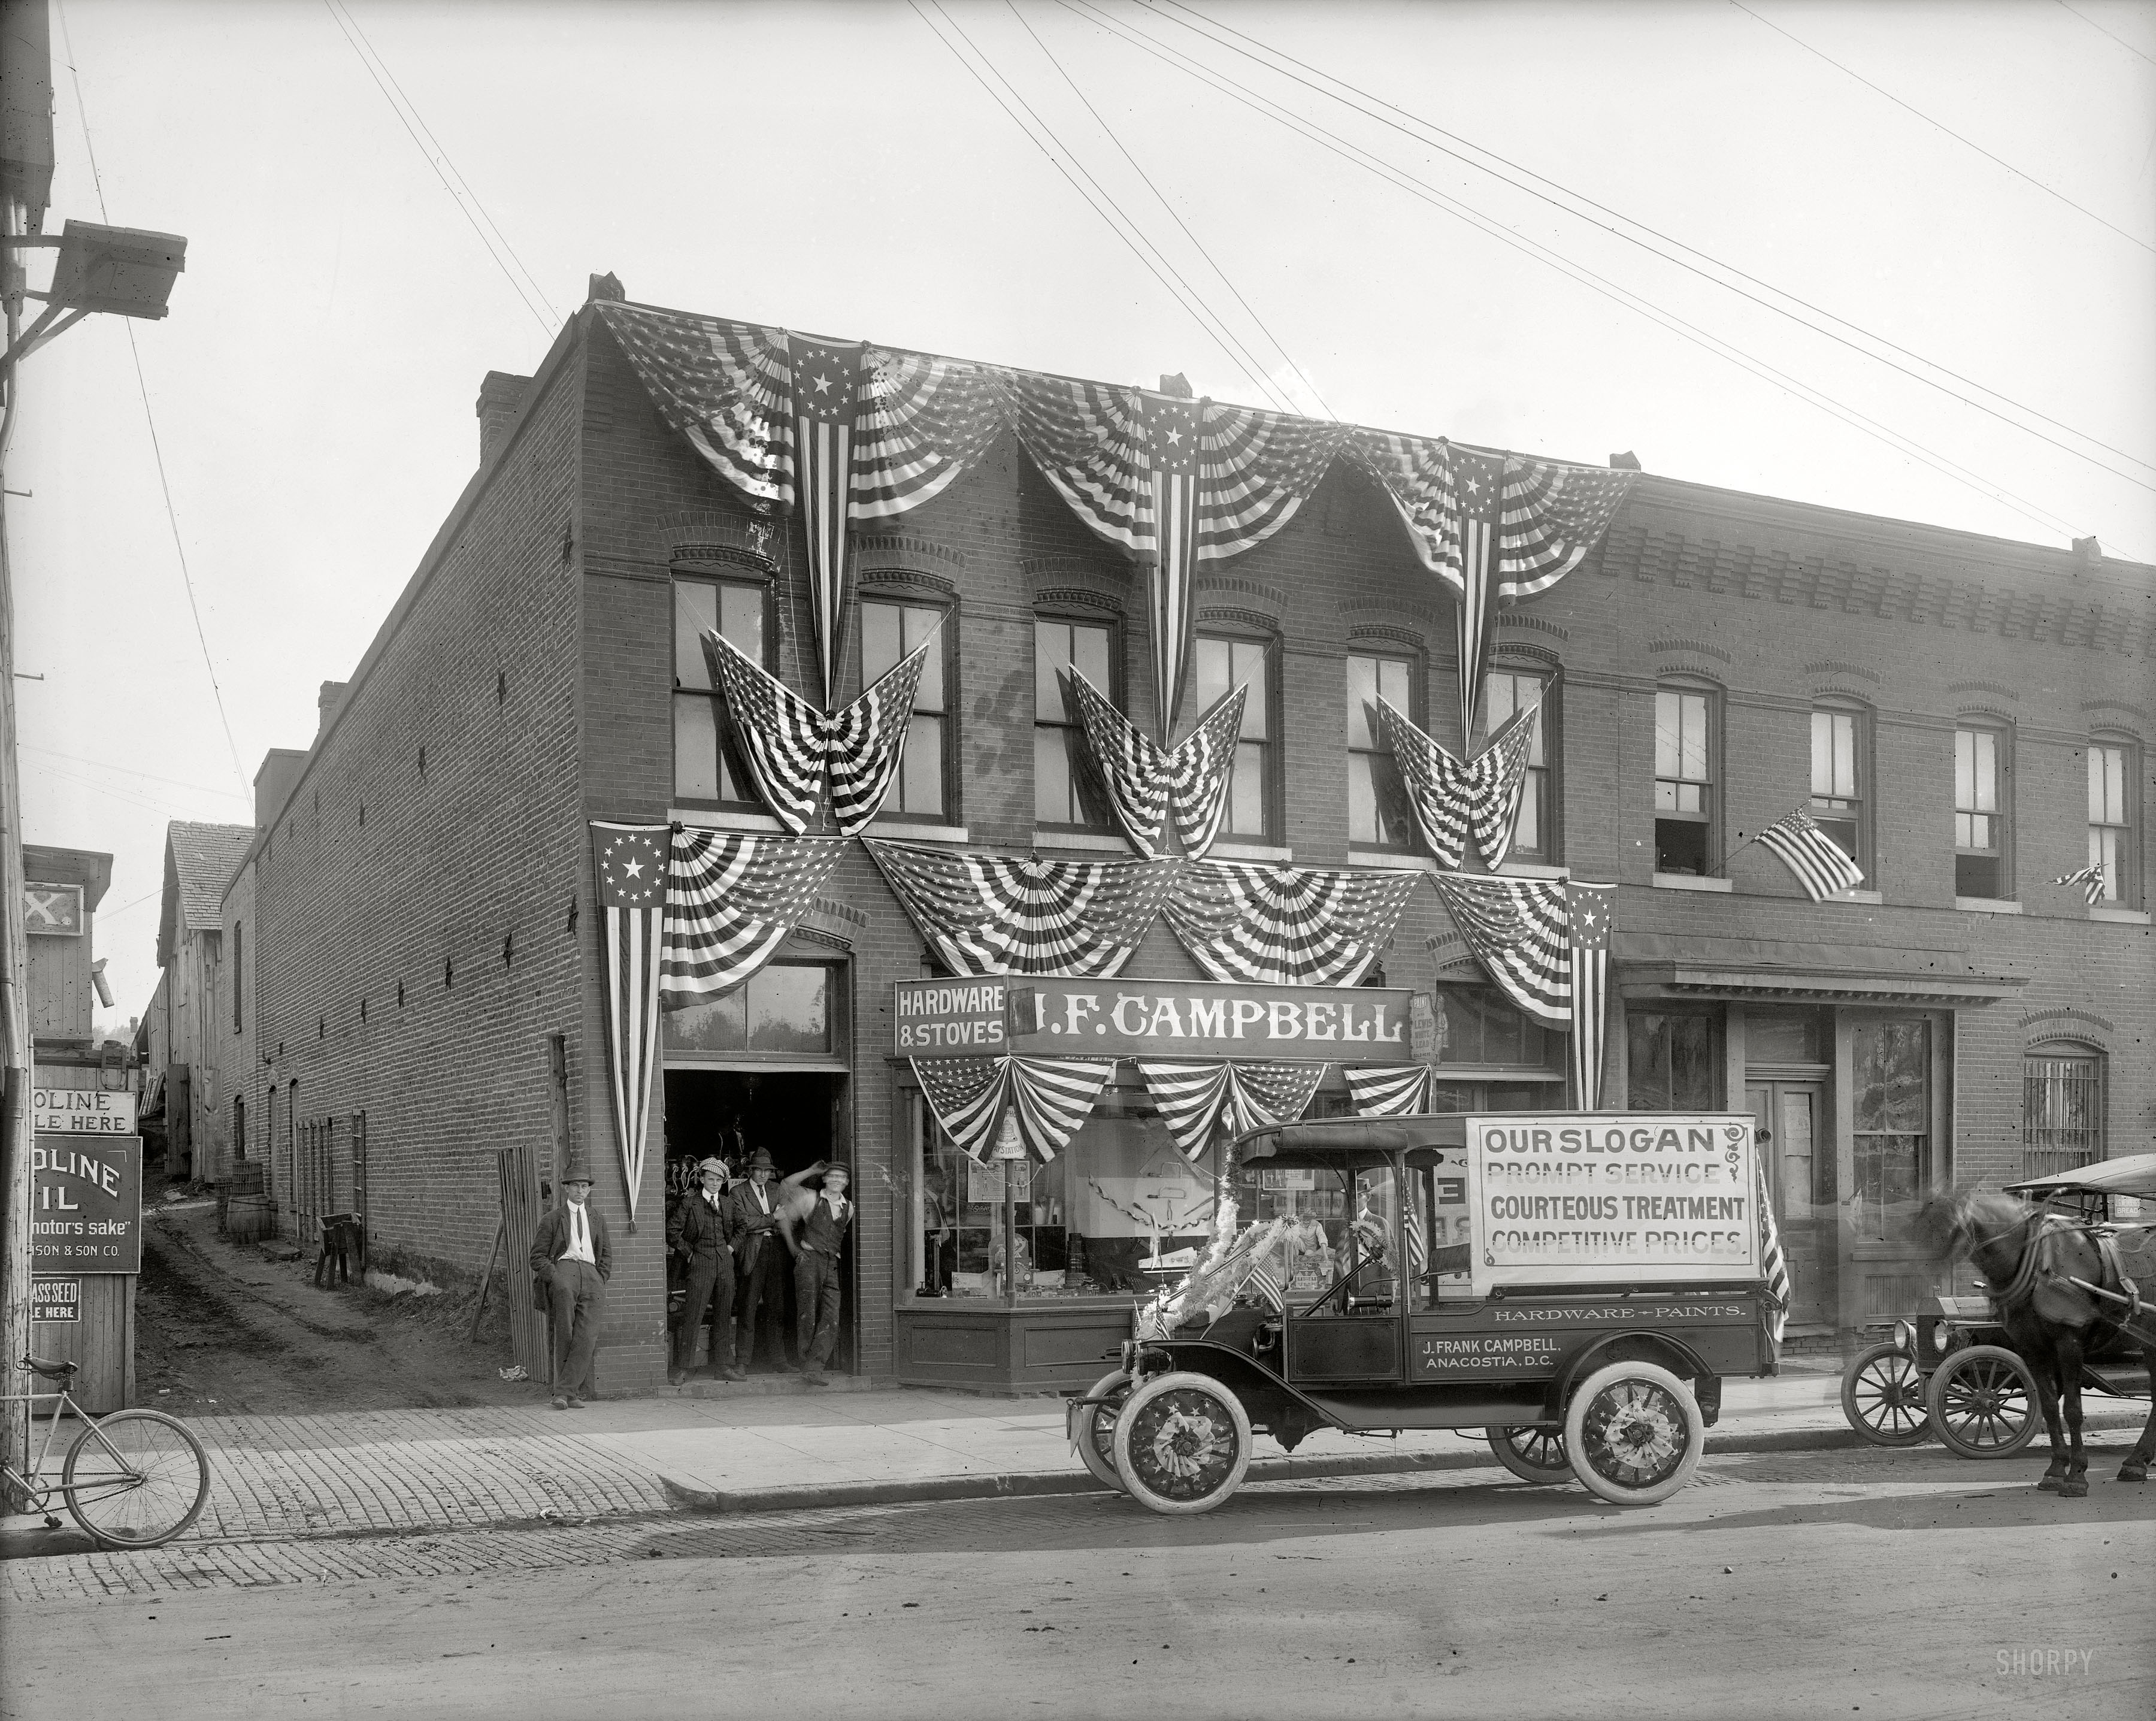 "J.F. Campbell, Anacostia, decorated with American flags." Circa 1918, another patriotically attired hardware store in Washington's Anacostia neighborhood. Check out the Mad Hatter. National Photo glass negative. View full size.